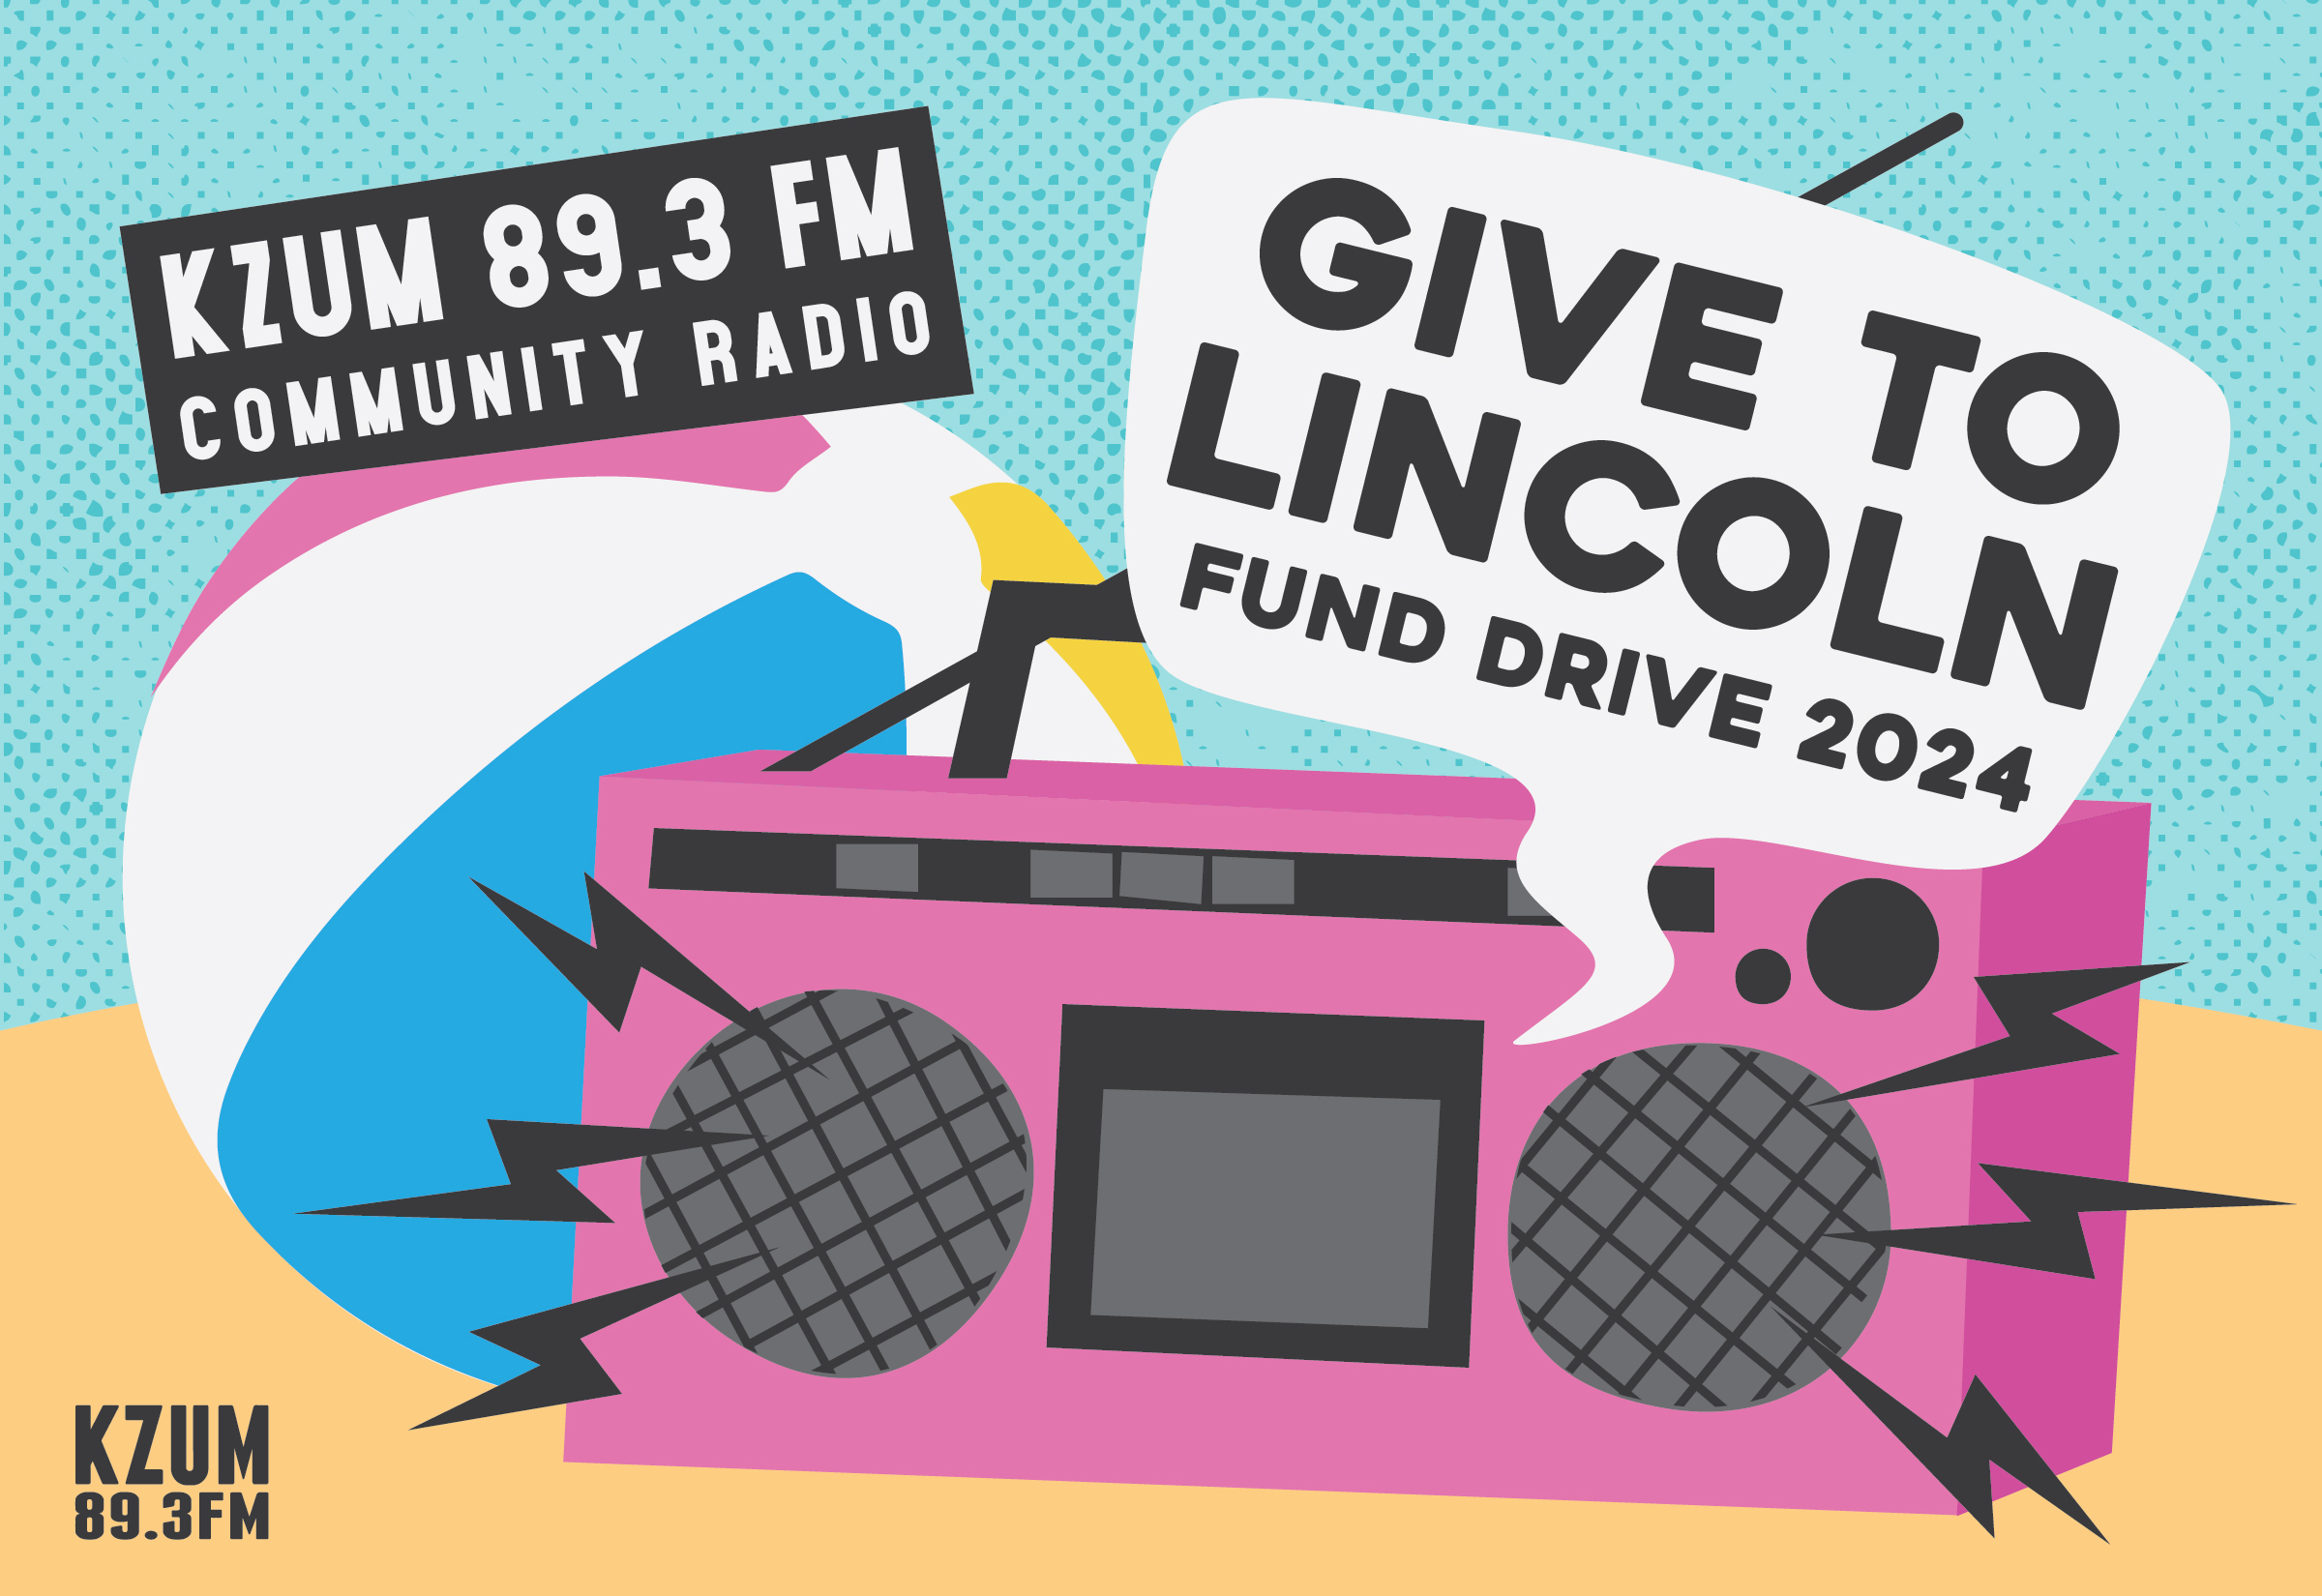 KZUM's Annual Give To Lincoln Fund Drive officially starts on May 6, 2024 and runs through Sunday, May 12, 2024.